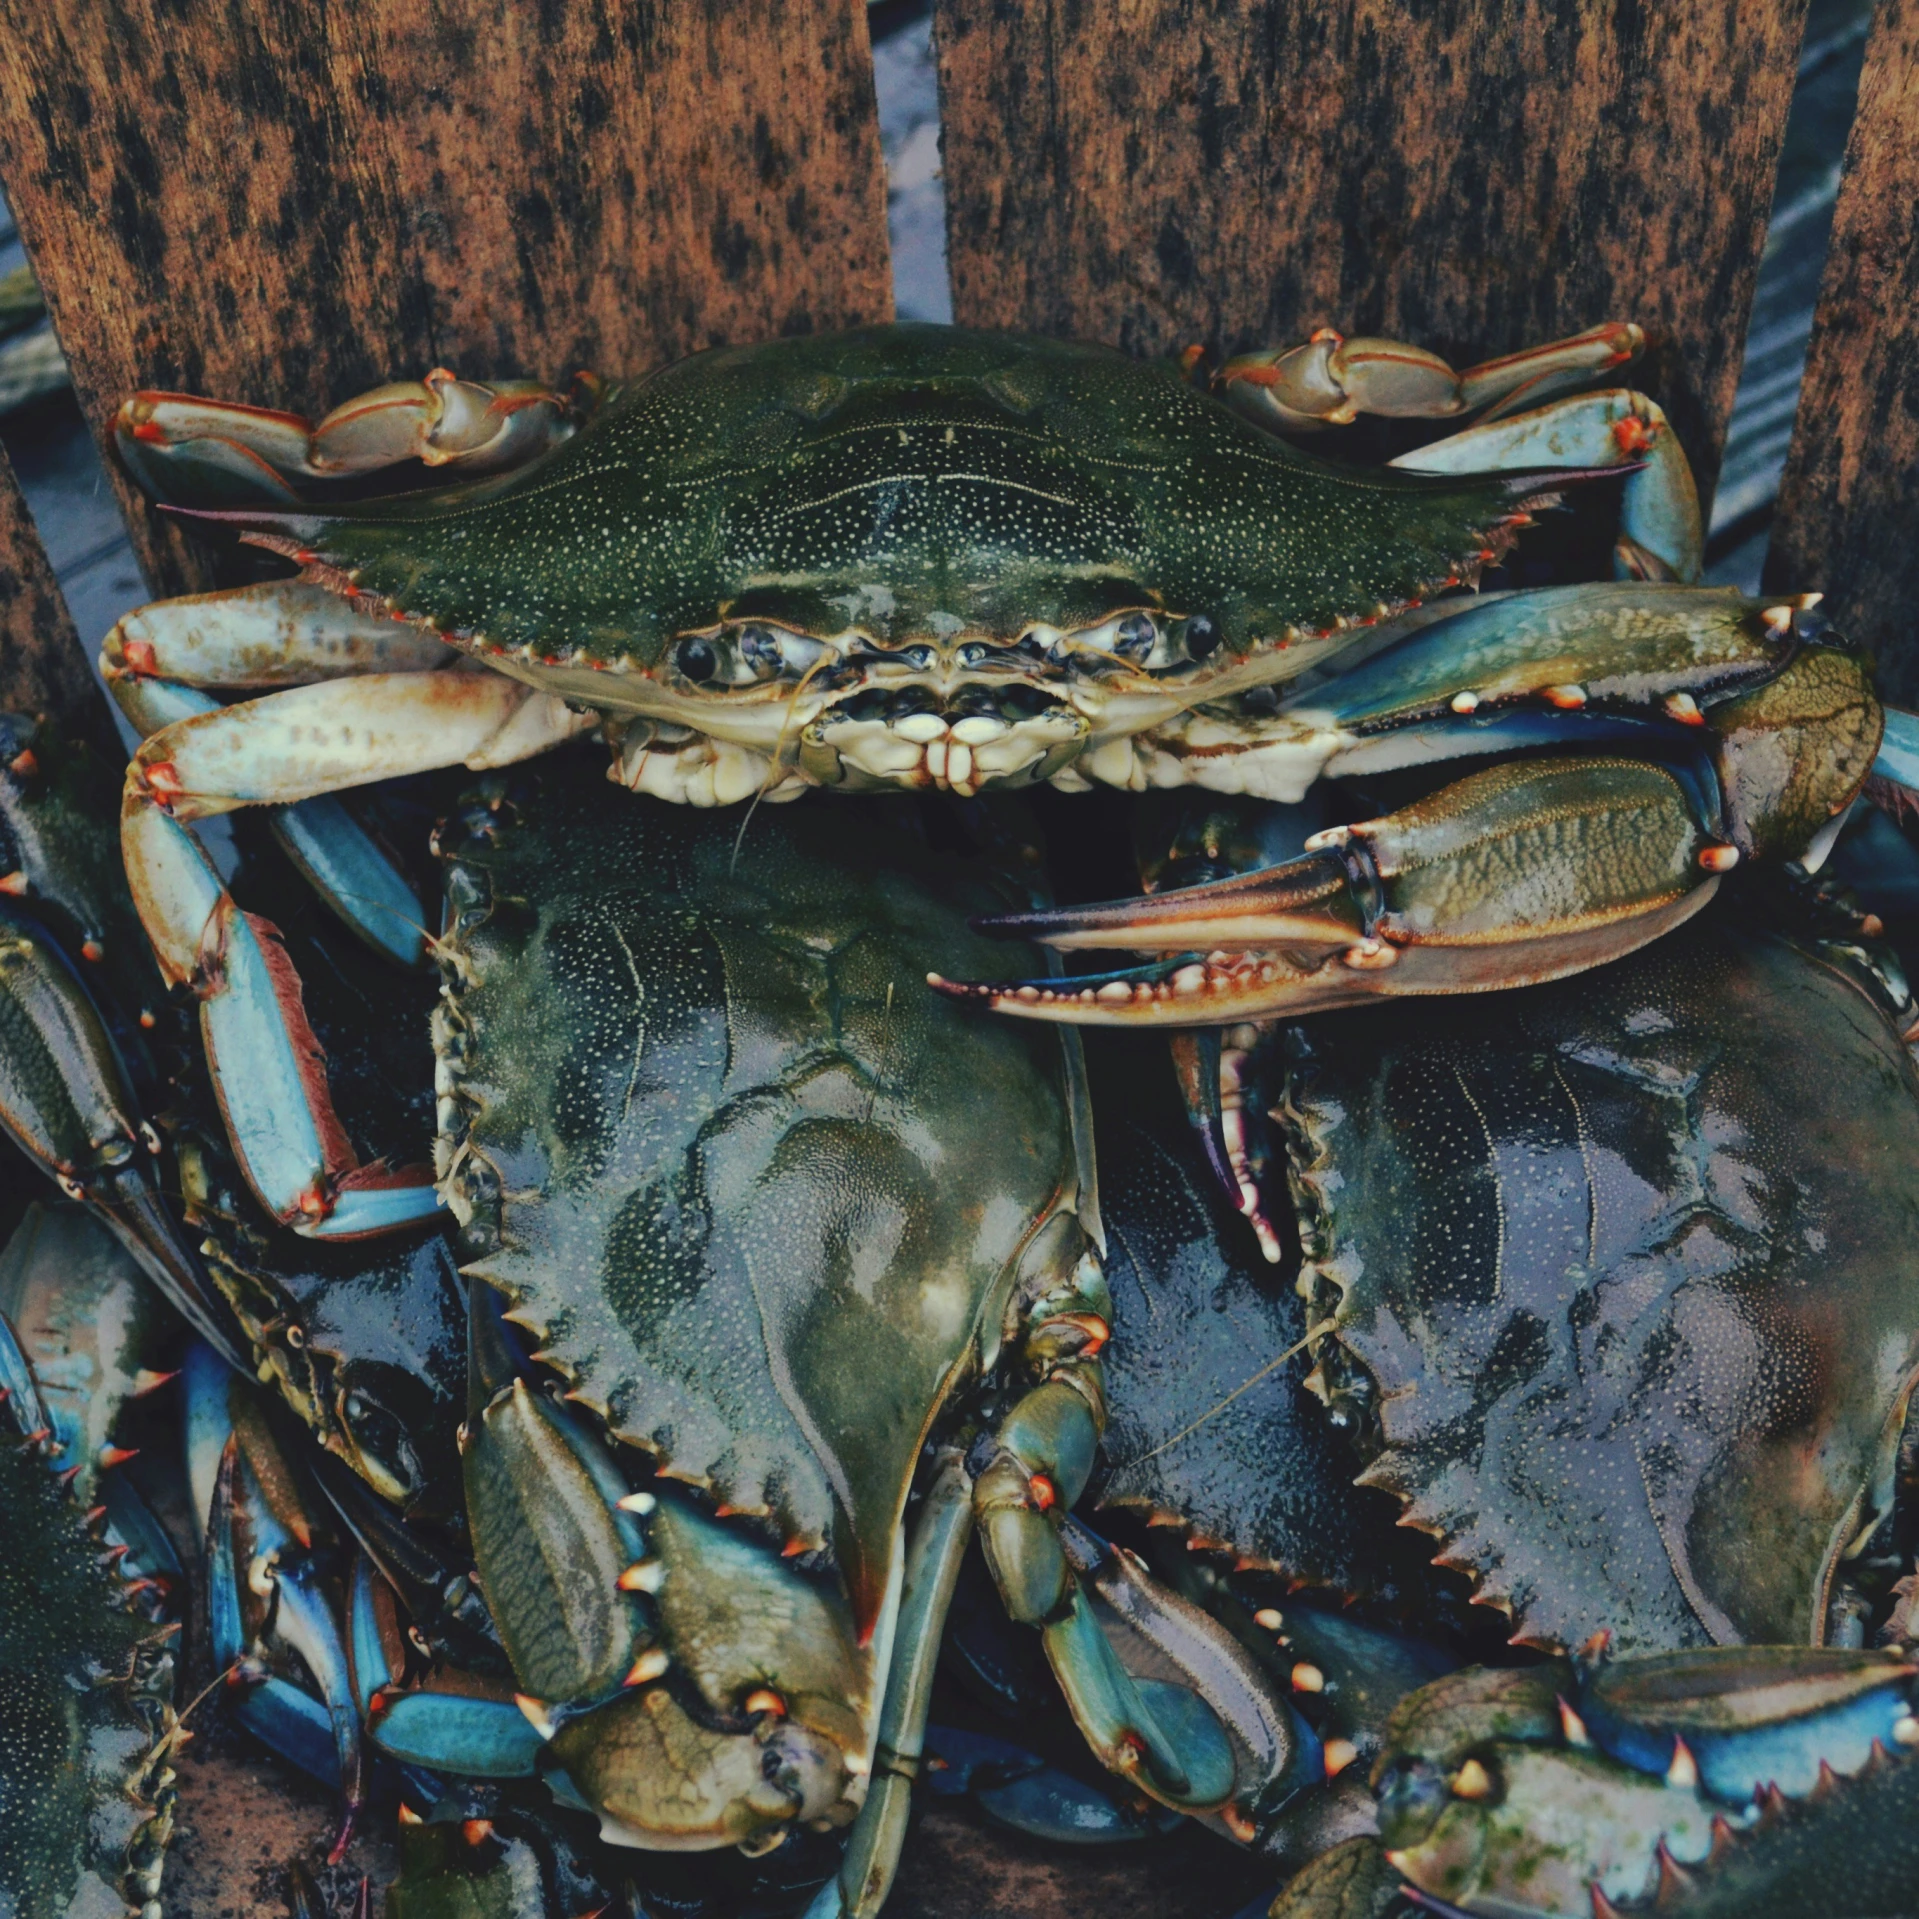 a pile of blue crabs in an old - fashioned box